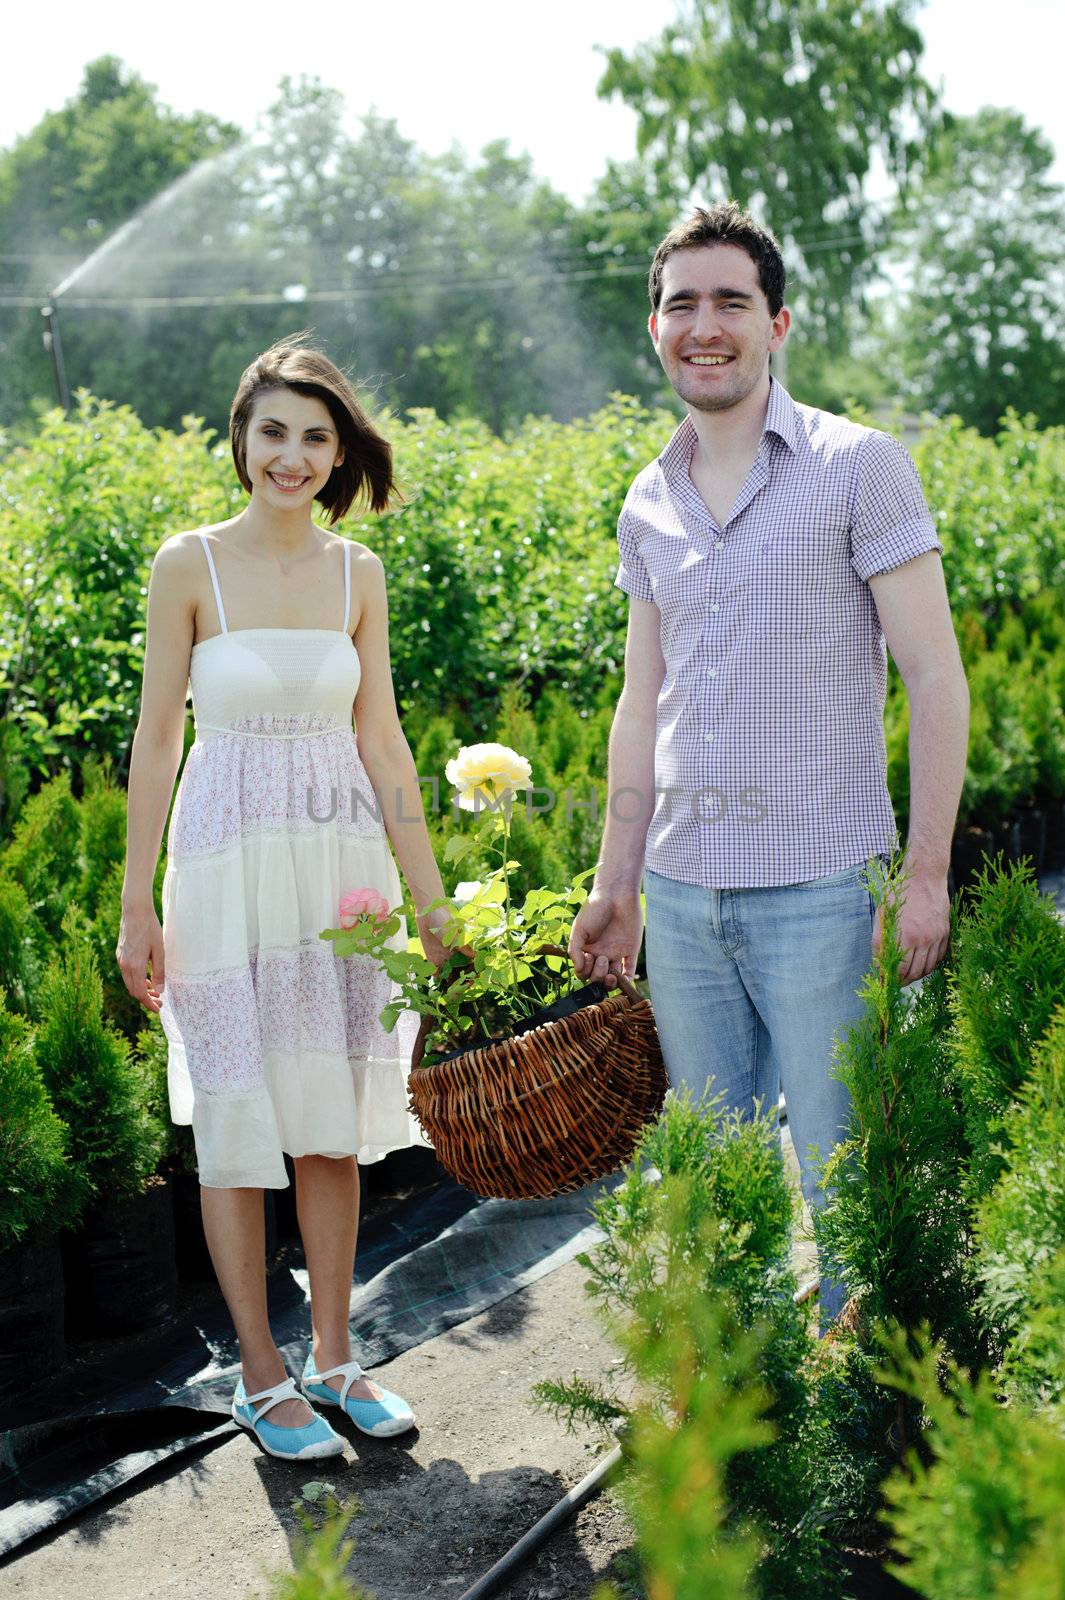 An image of a young couple with basket with roses